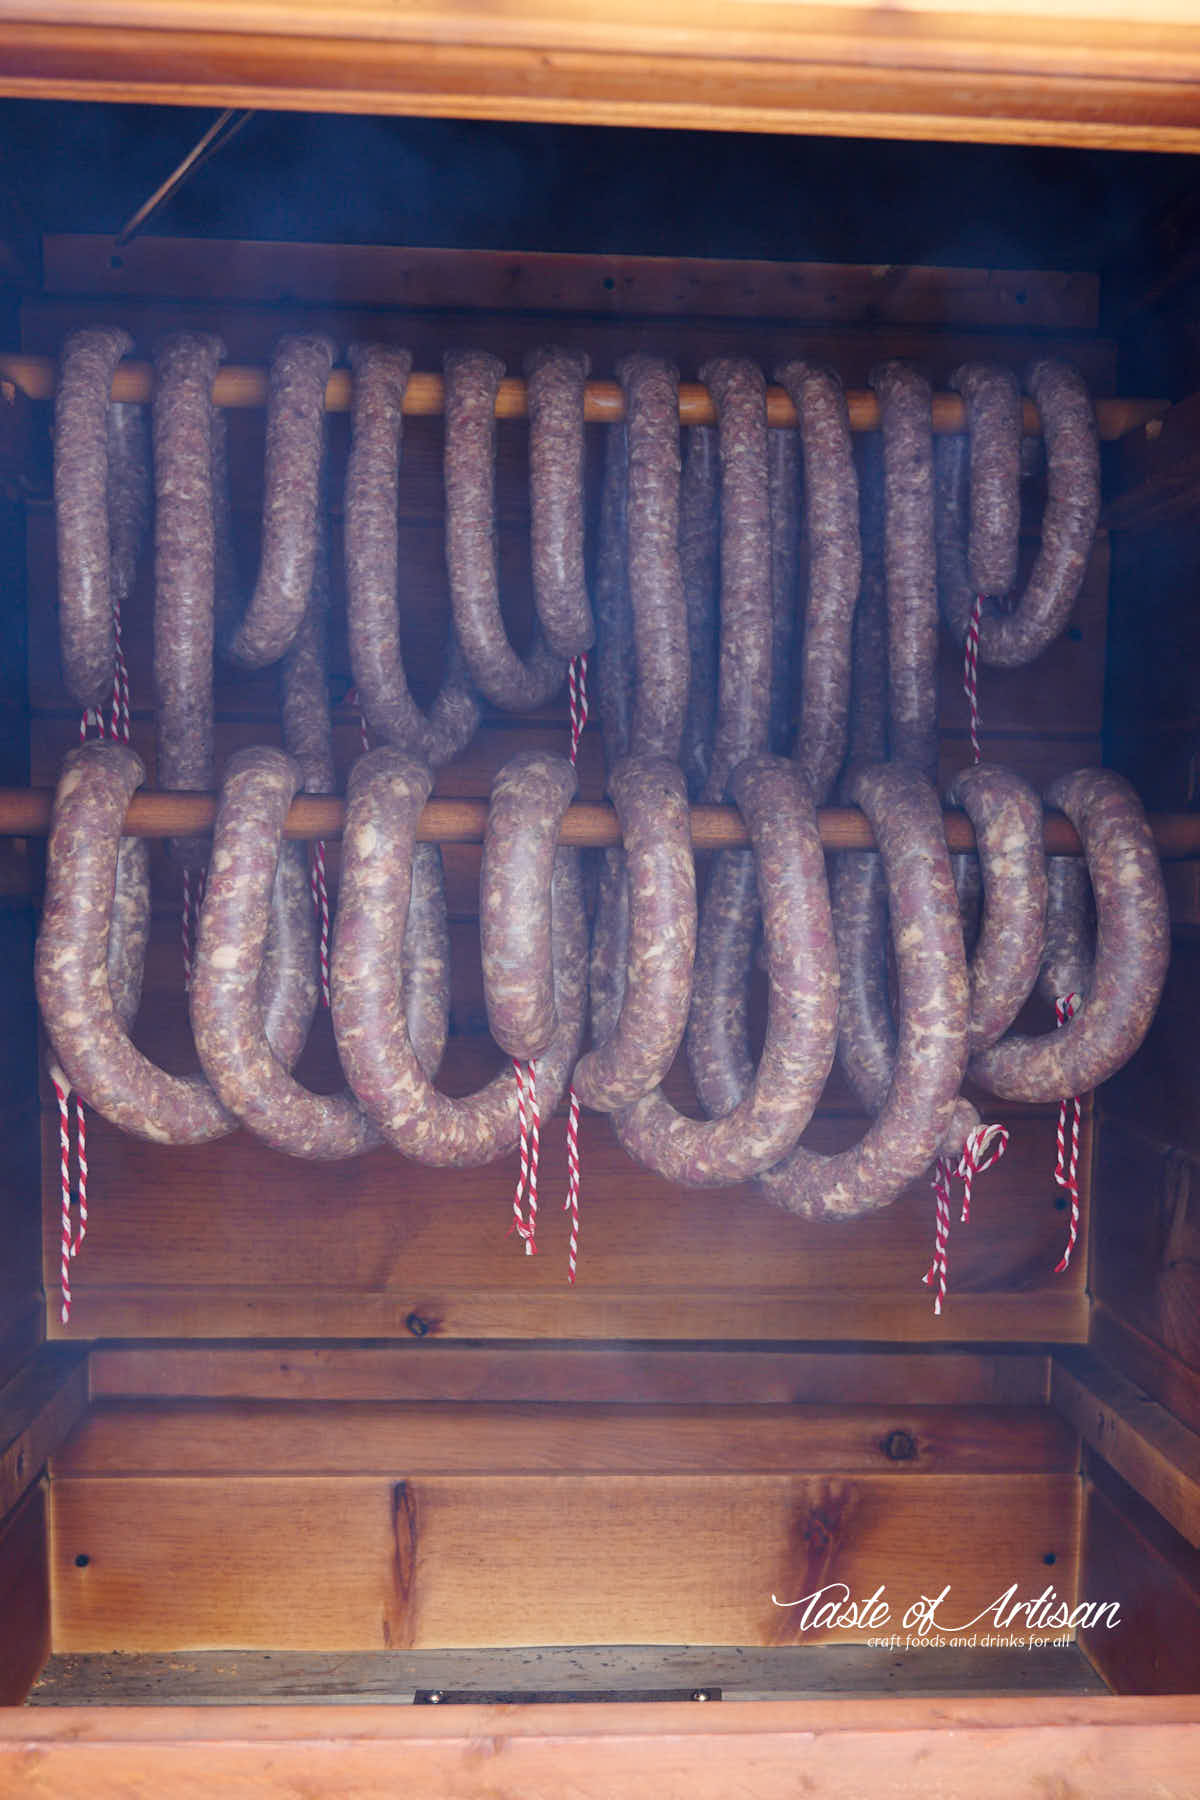 Raw sausages handing on sticks in a smokehouse.